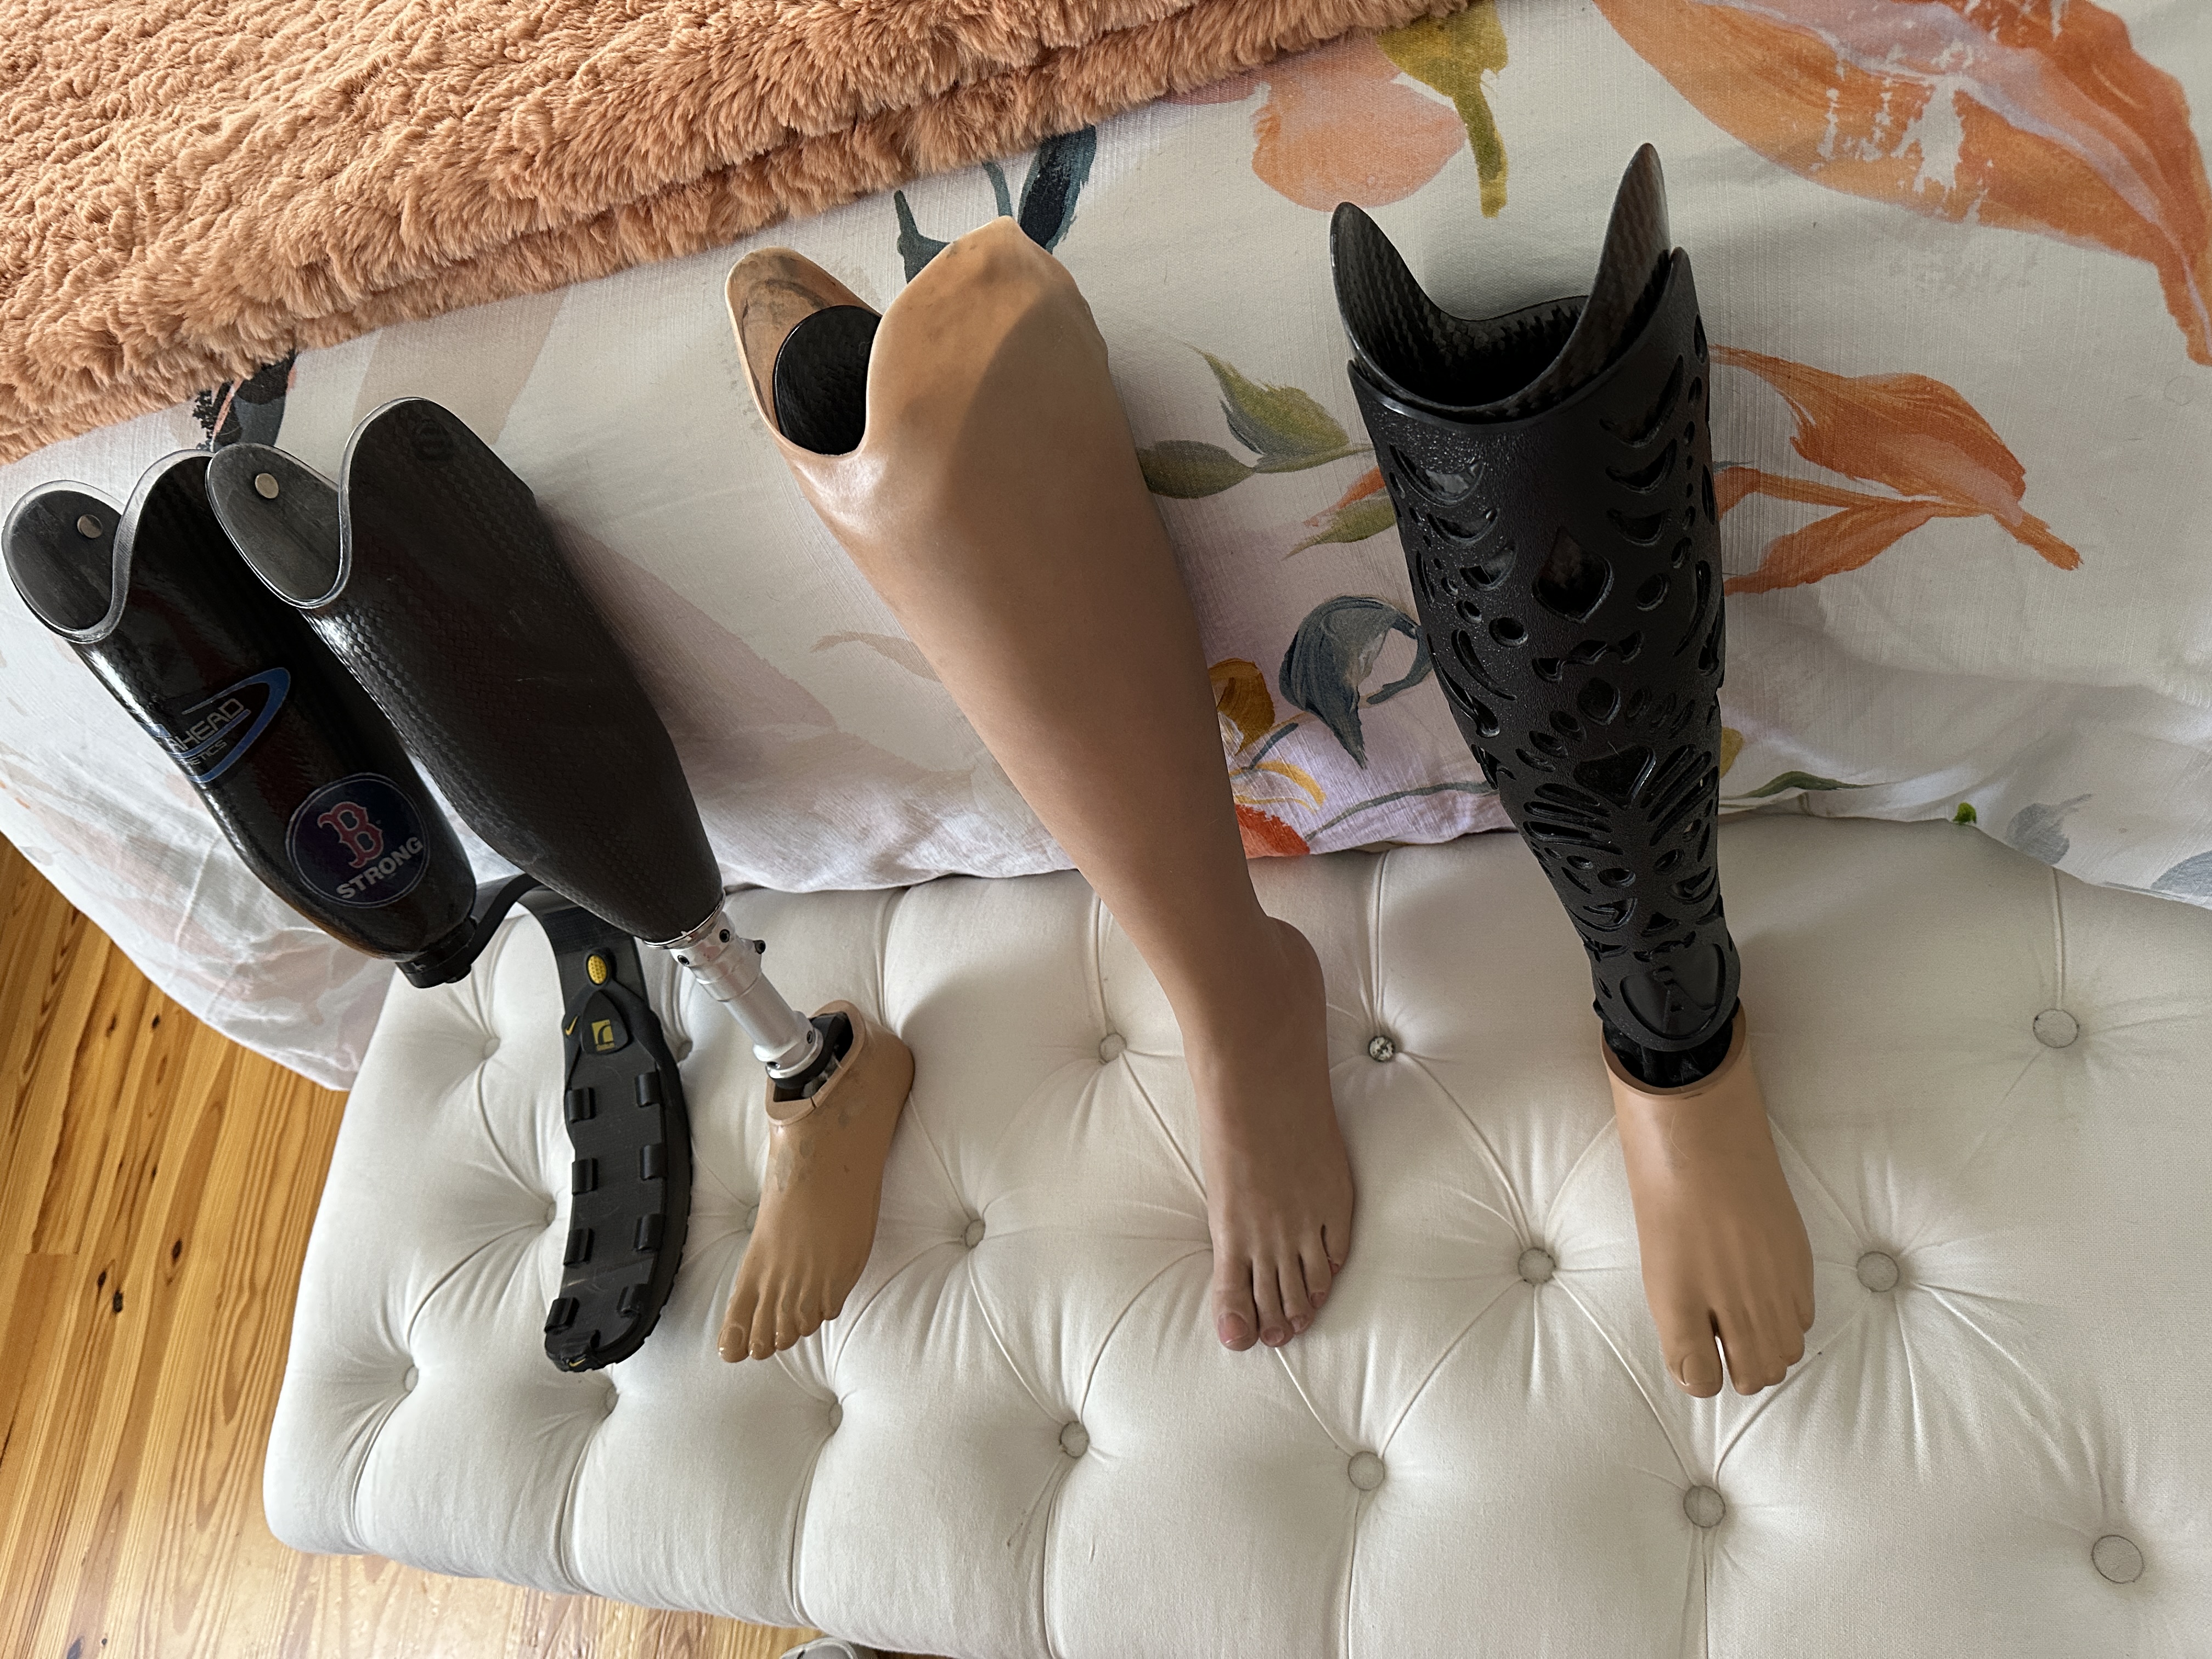 prosthetic legs against a bed